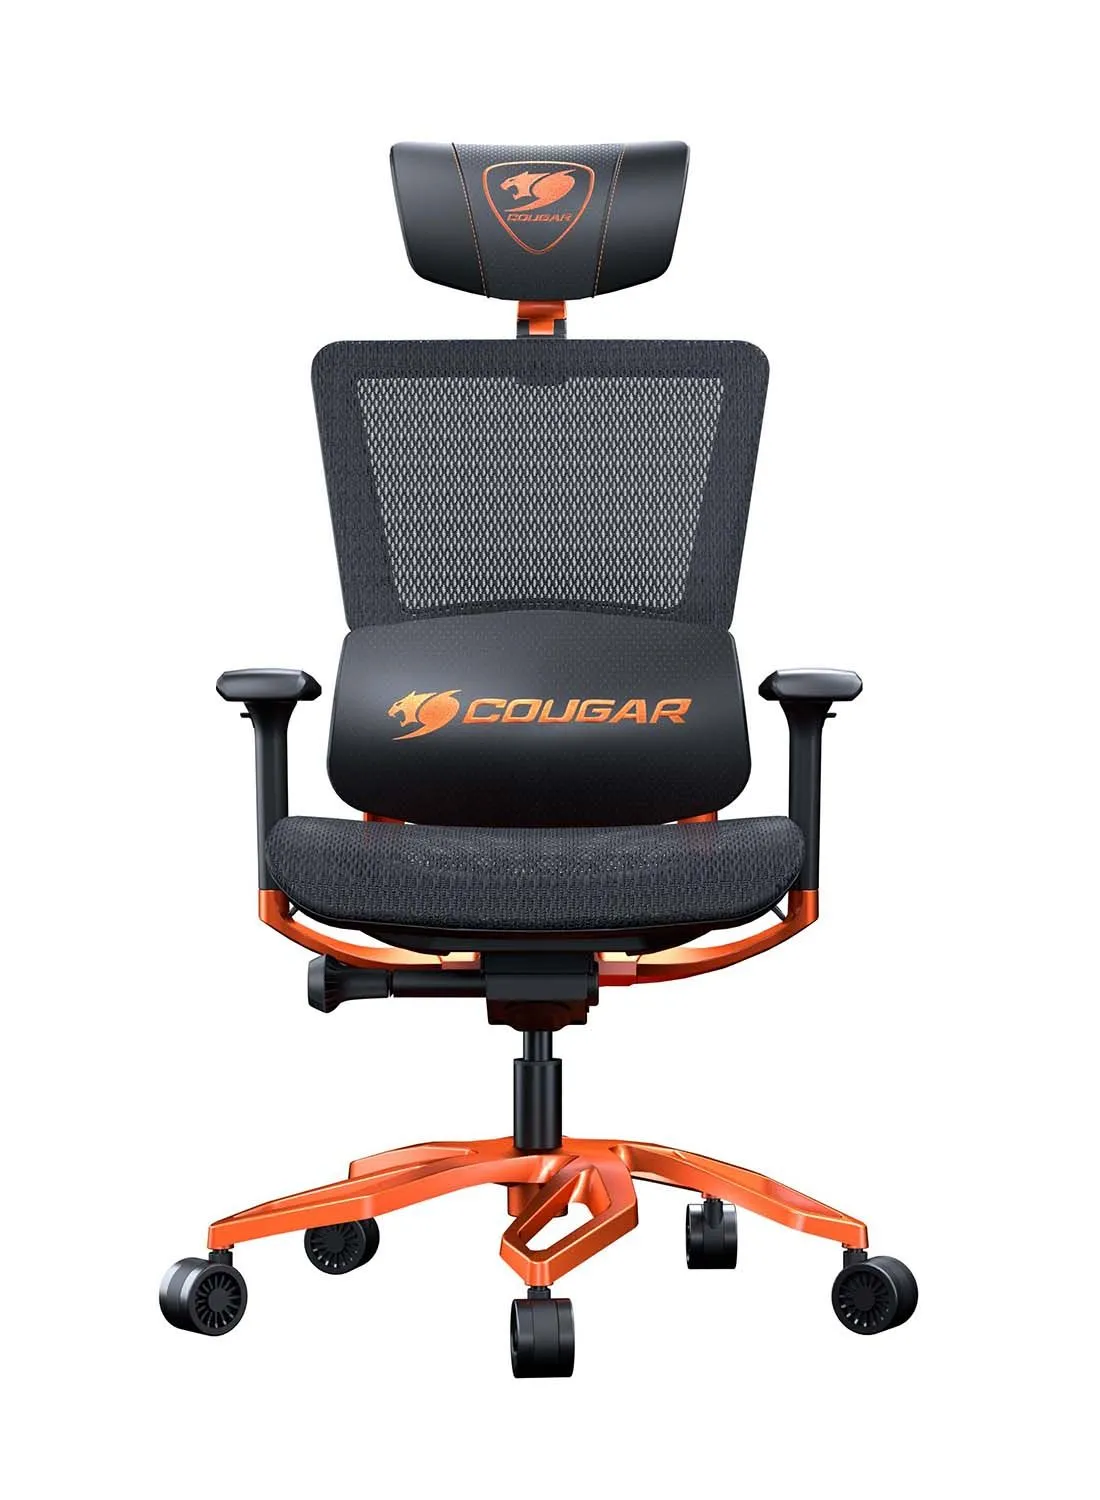 Cougar Ergonomic Gaming Chair Argo with Steel-Frame and Trigger Shift Wire Control System Orange